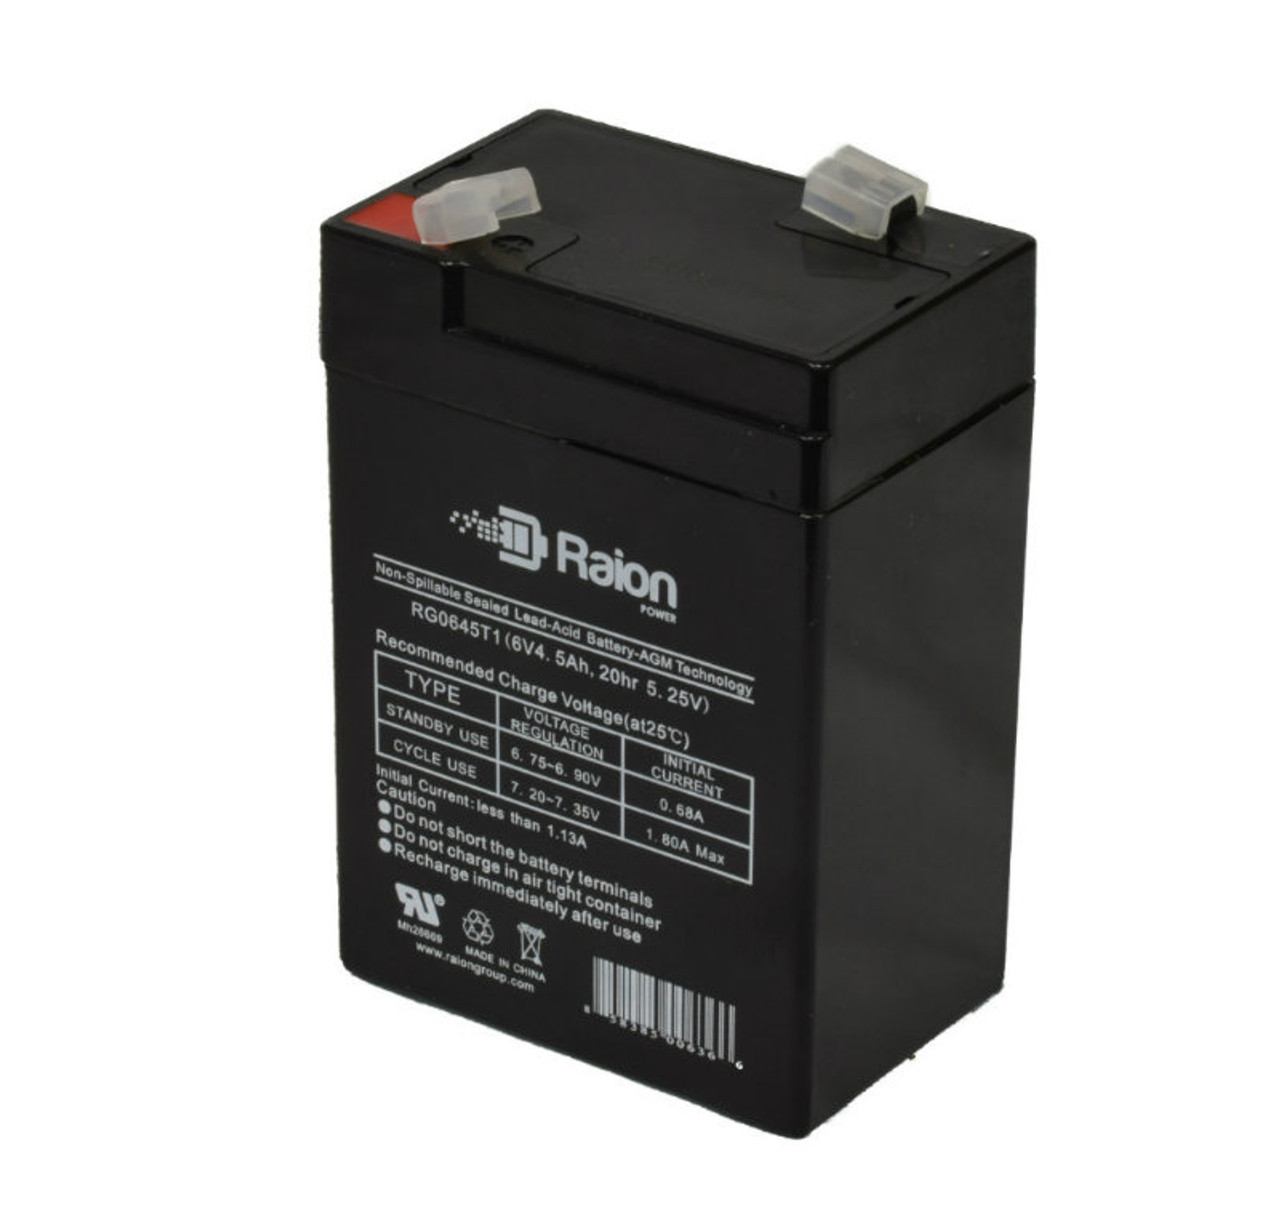 Raion Power RG0645T1 6V 4.5Ah Replacement Battery Cartridge for Panasonic LC-RB064P